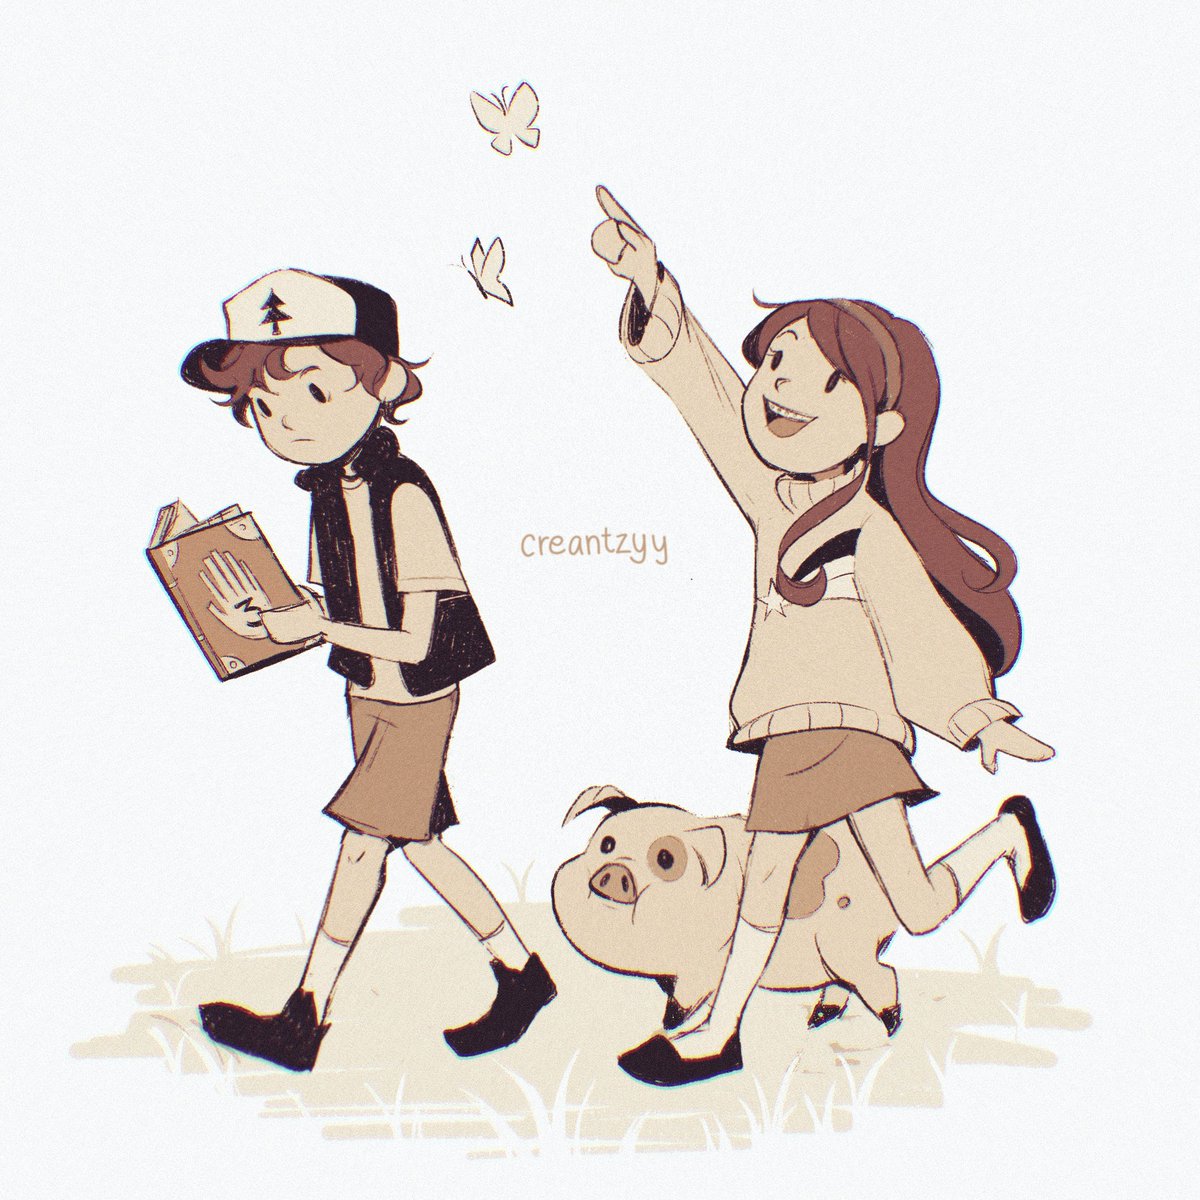 They mean everything to me
#Dipperpines #mabelpines #GravityFalls